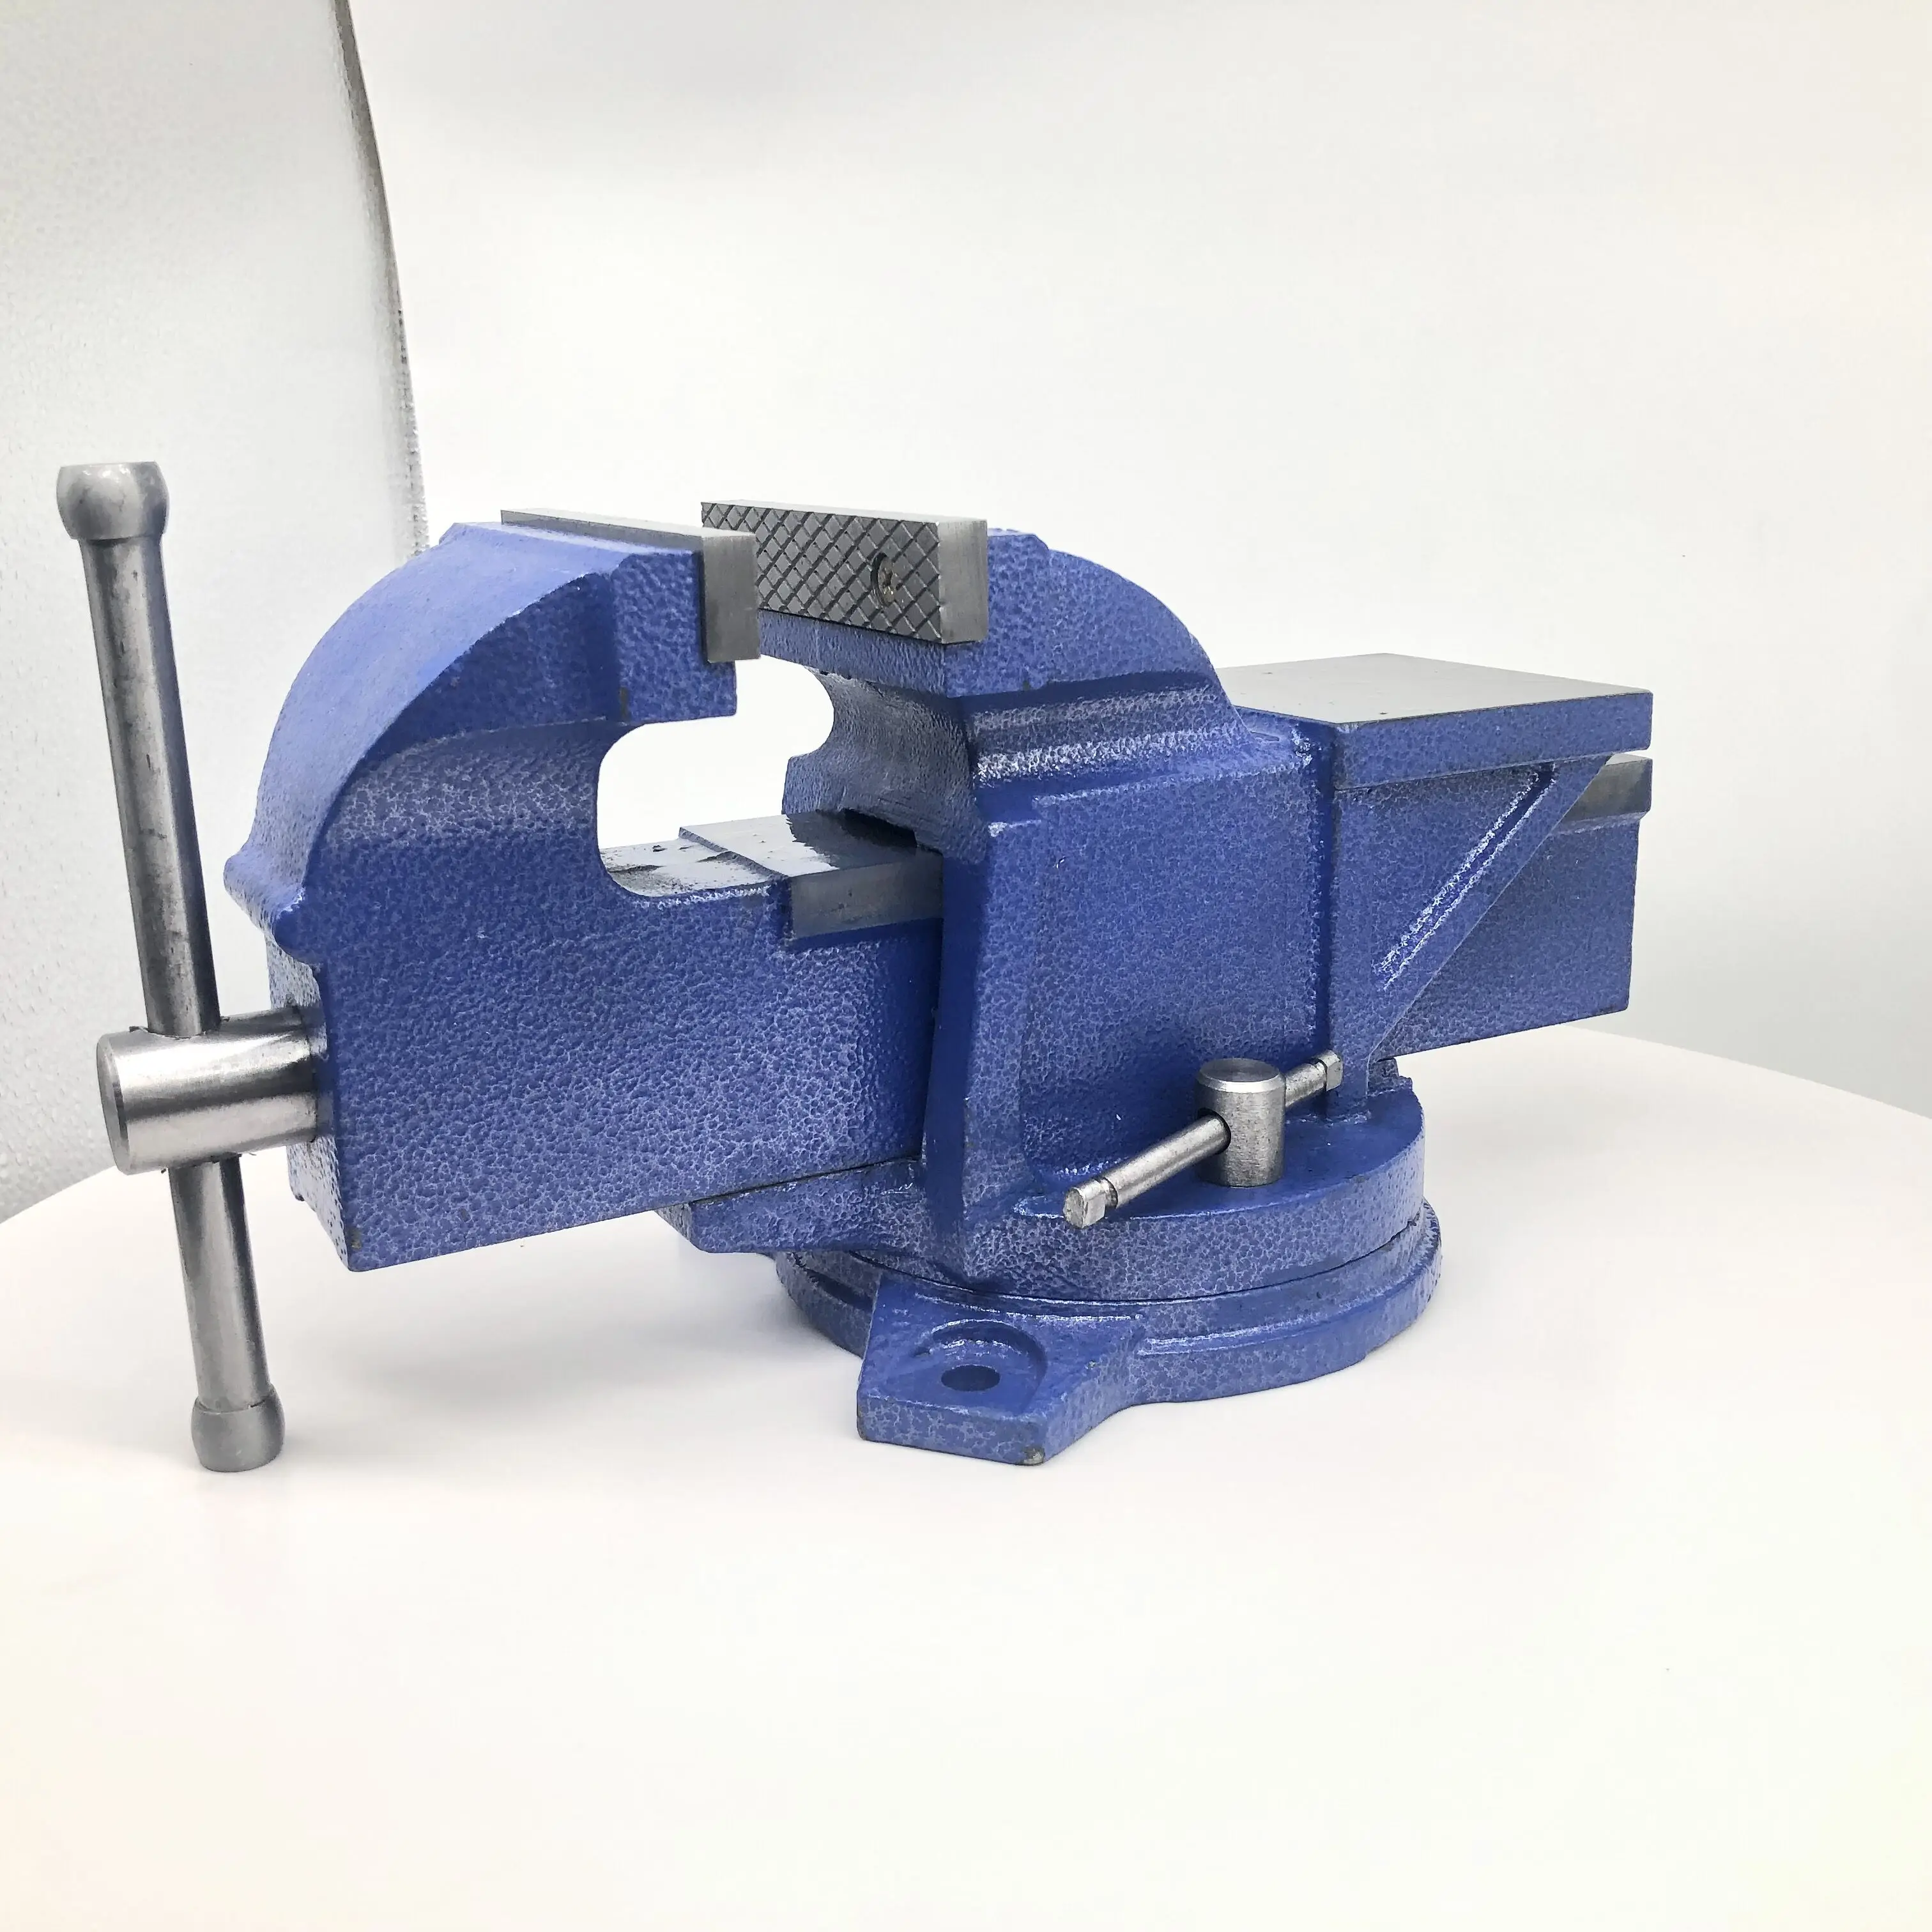 

Heavy Duty Bench Vise 360 Degree Swivel Base With Anvil Rotary Adjustable Vice for workshop and home